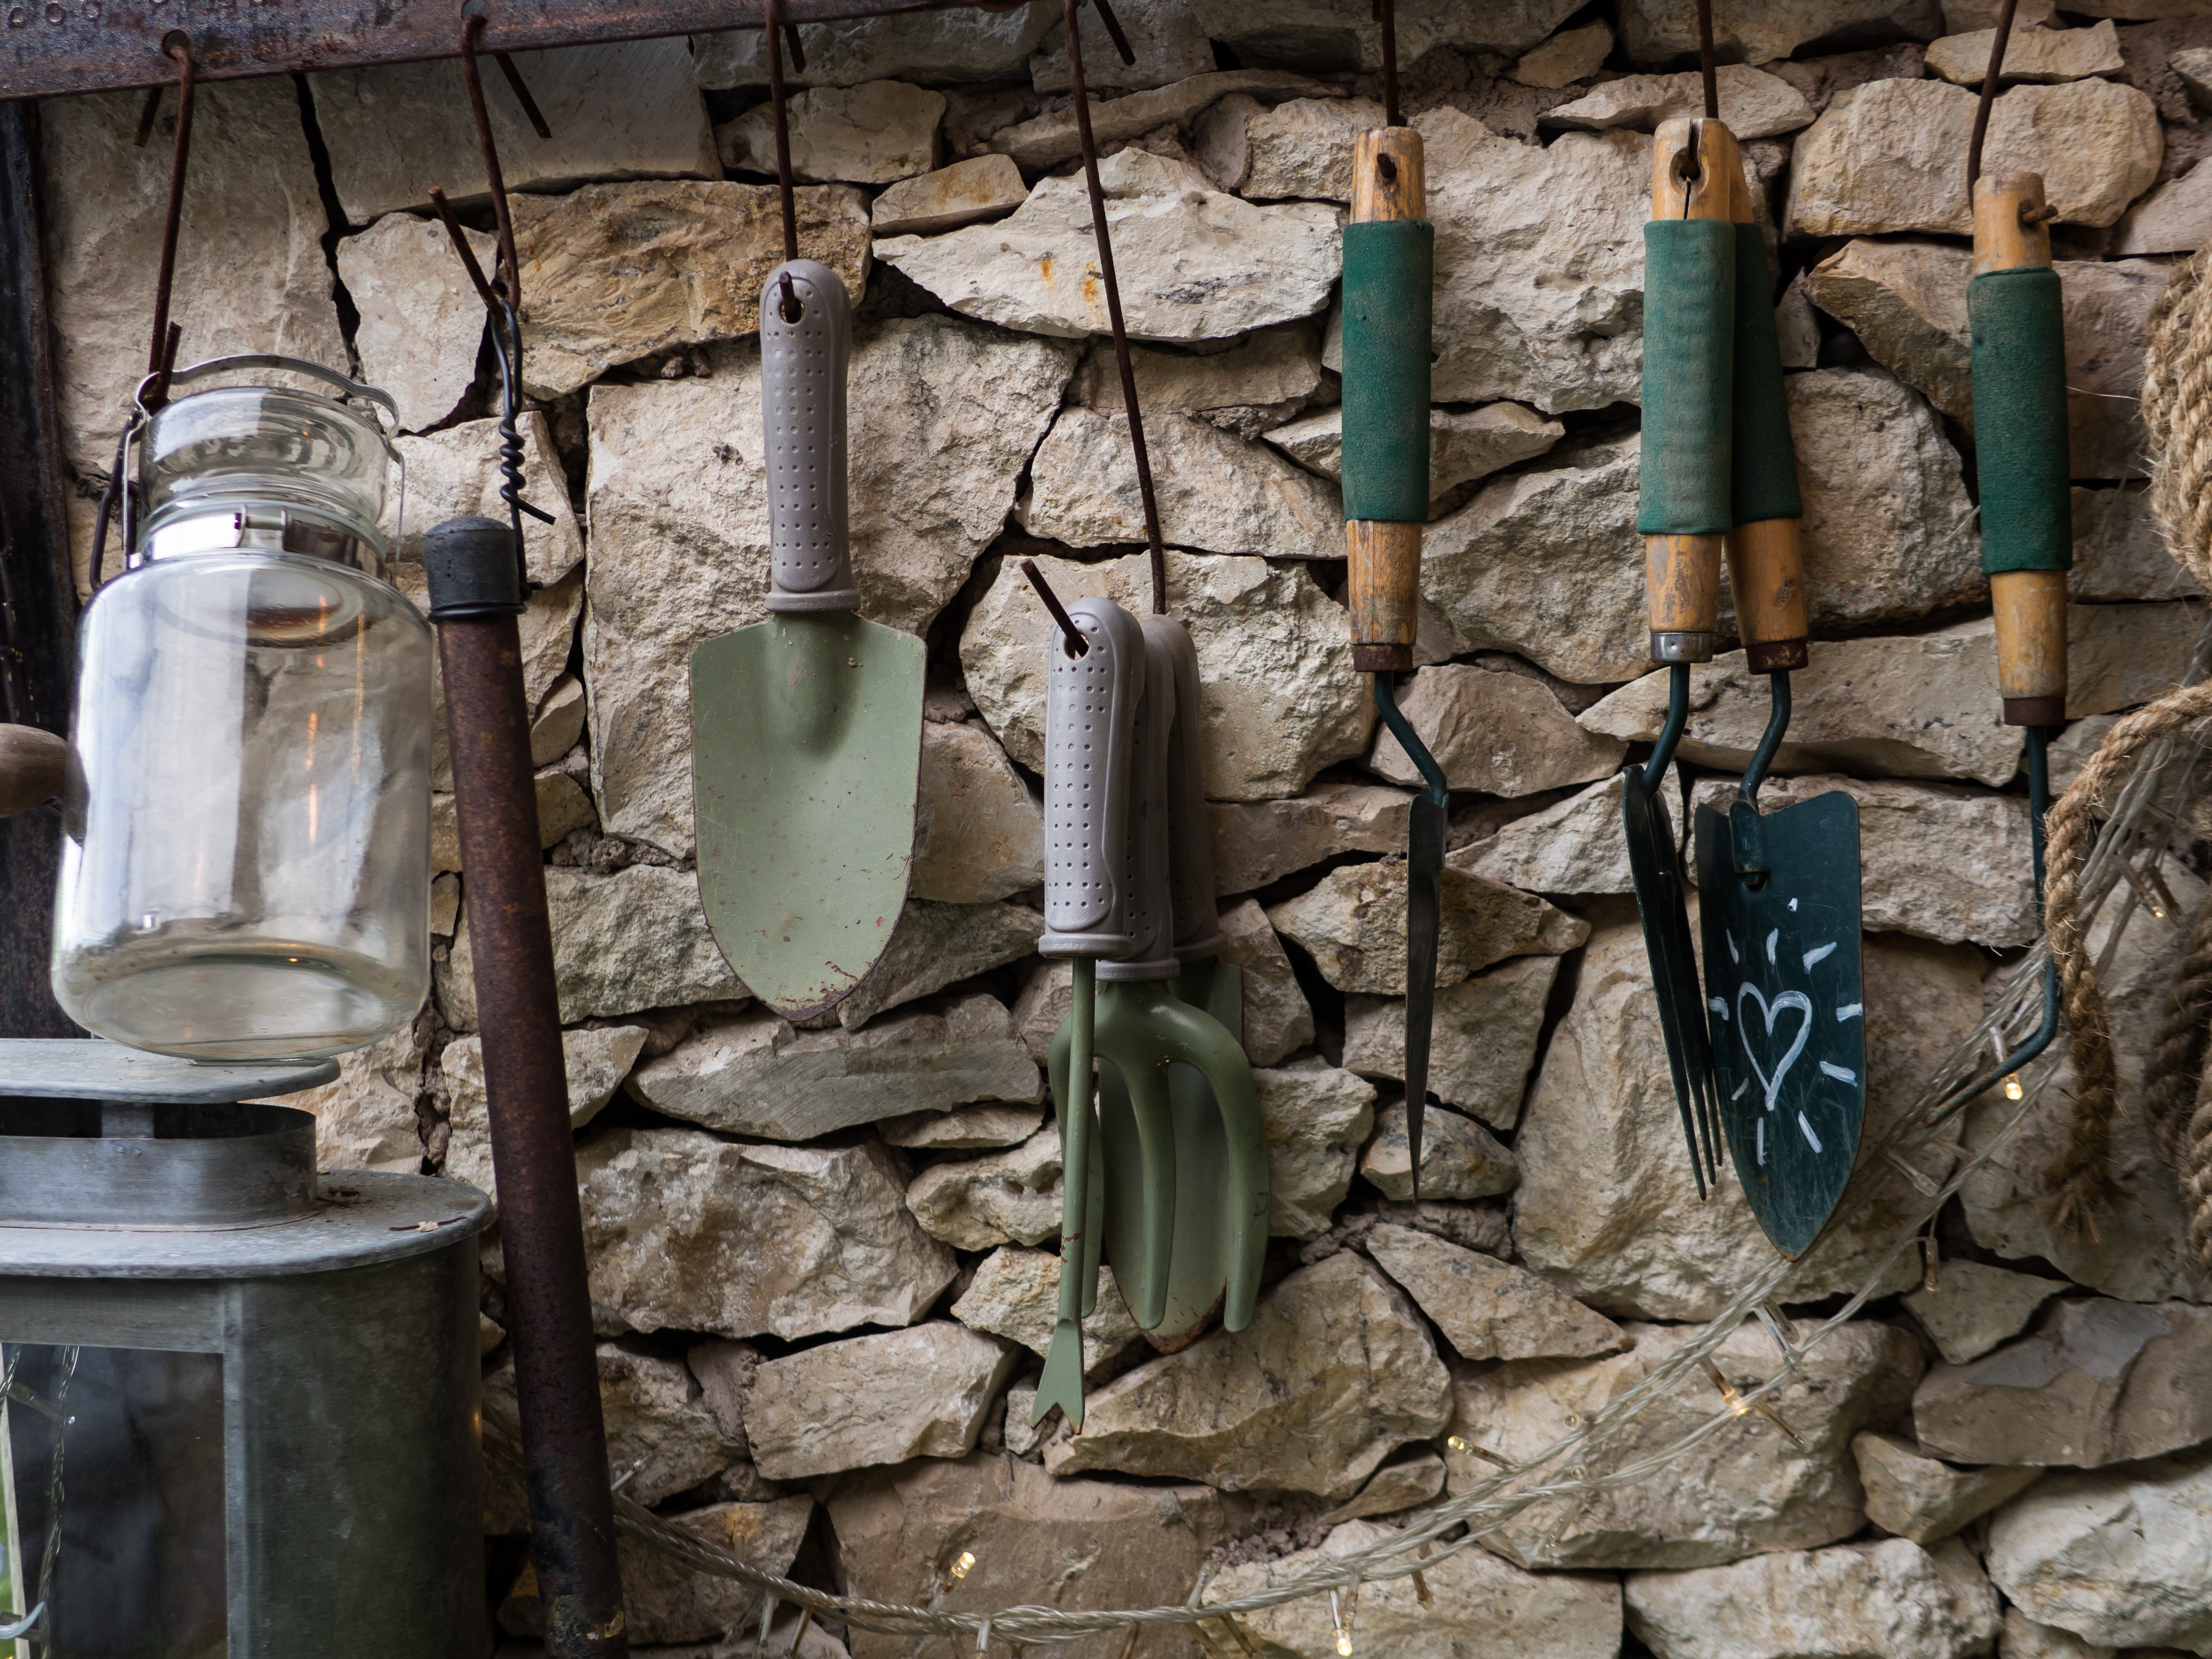 garden equipment hanging on the wall